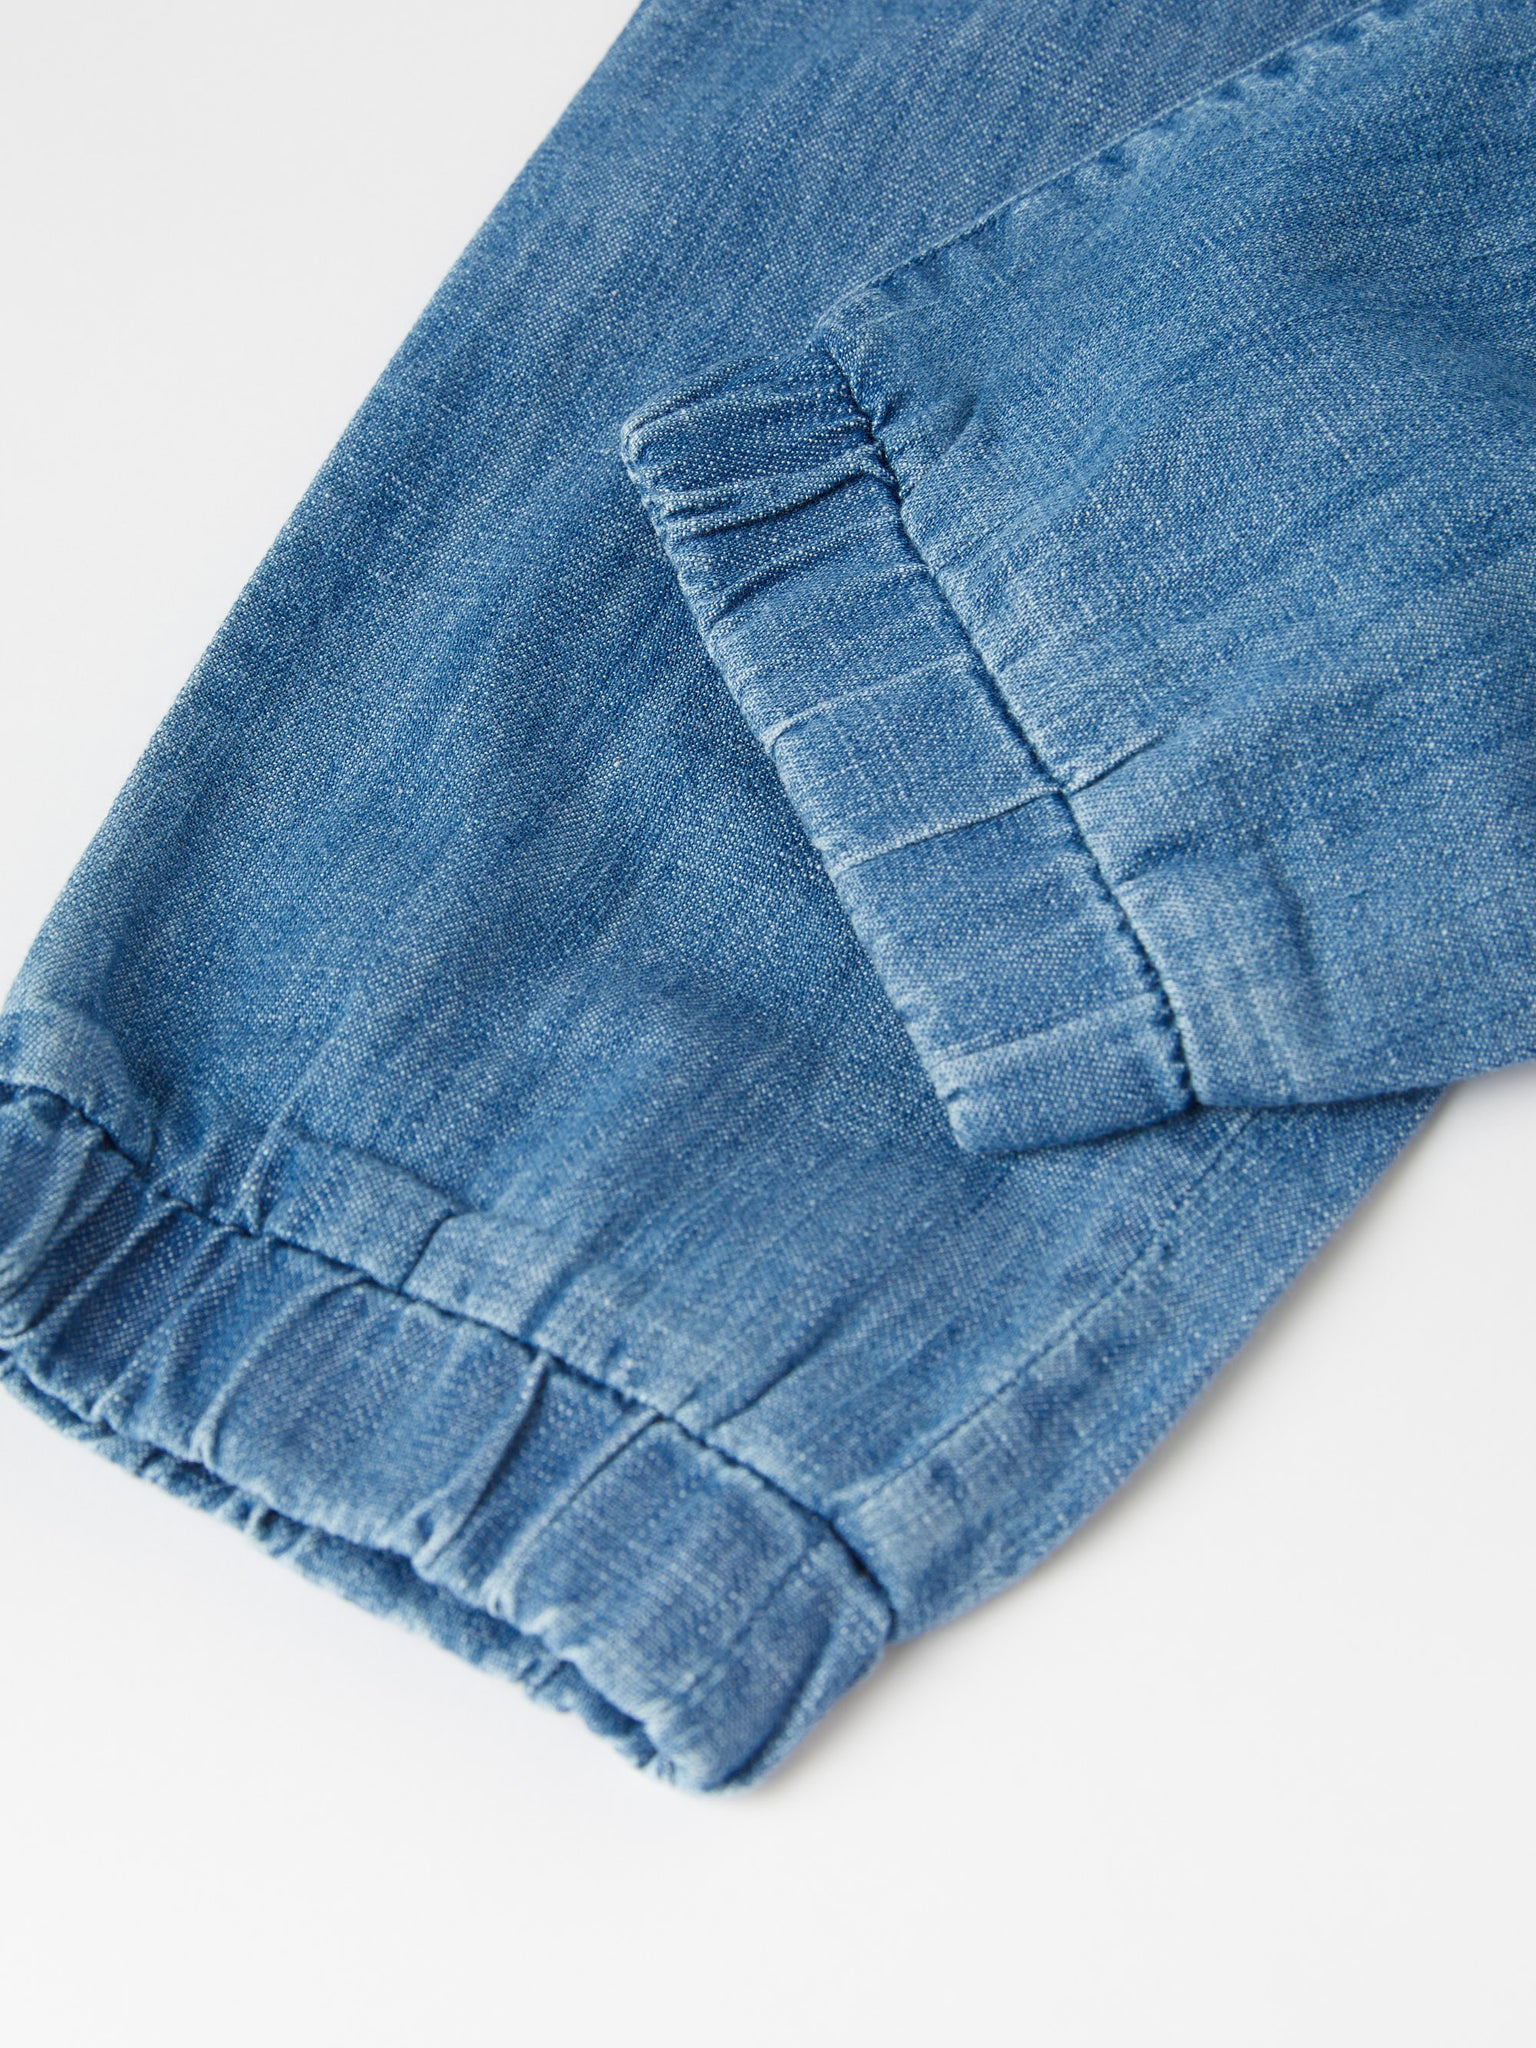 Denim Baby Trousers from the Polarn O. Pyret kidswear collection. The best ethical kids clothes